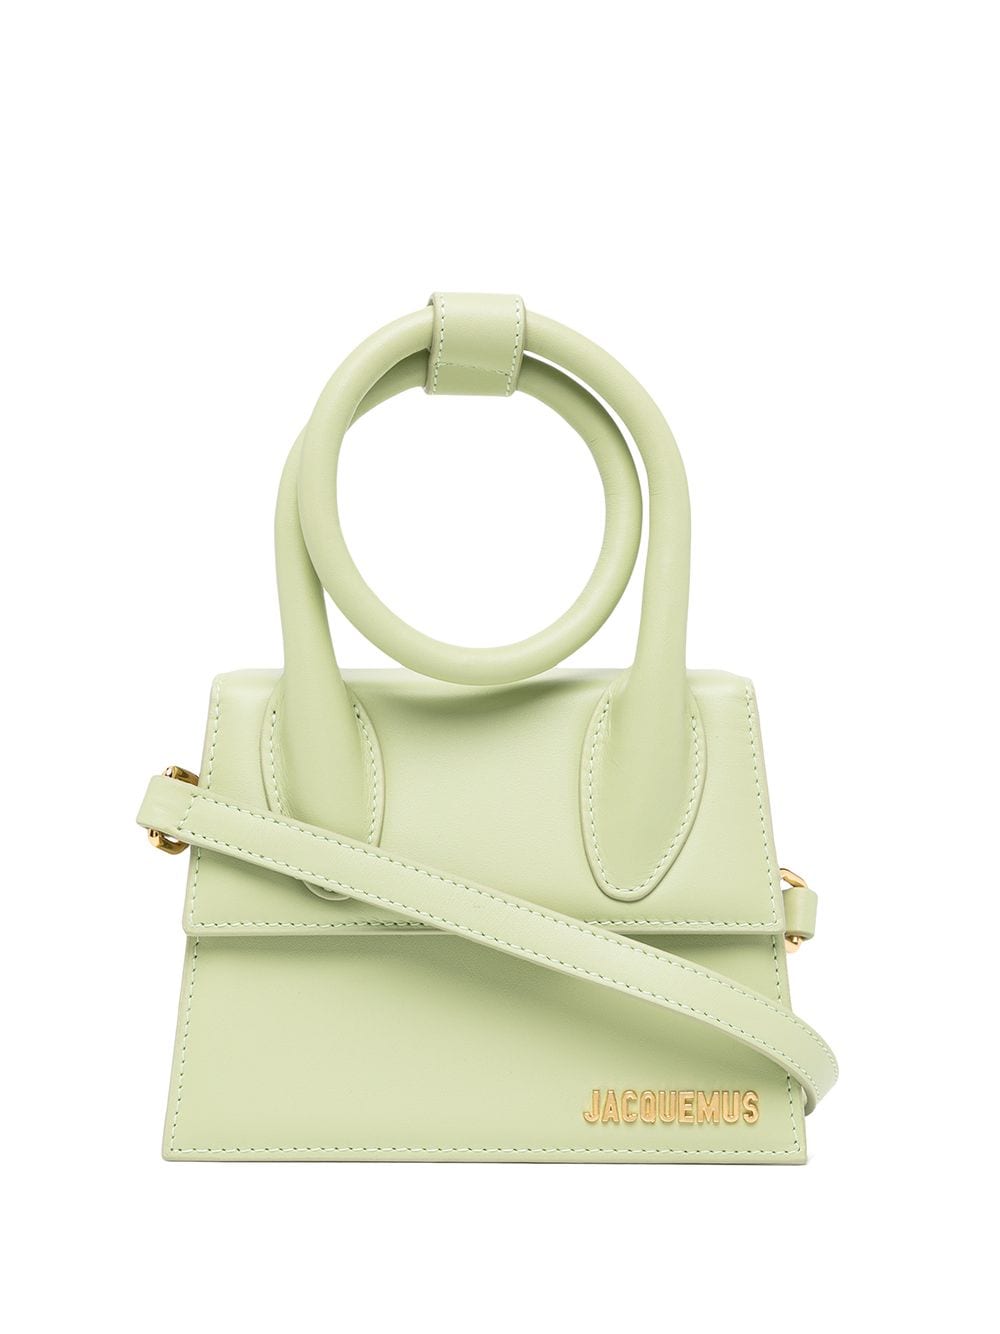 Jacquemus Le Chiquito Noeud Satchel In 510 Light Green